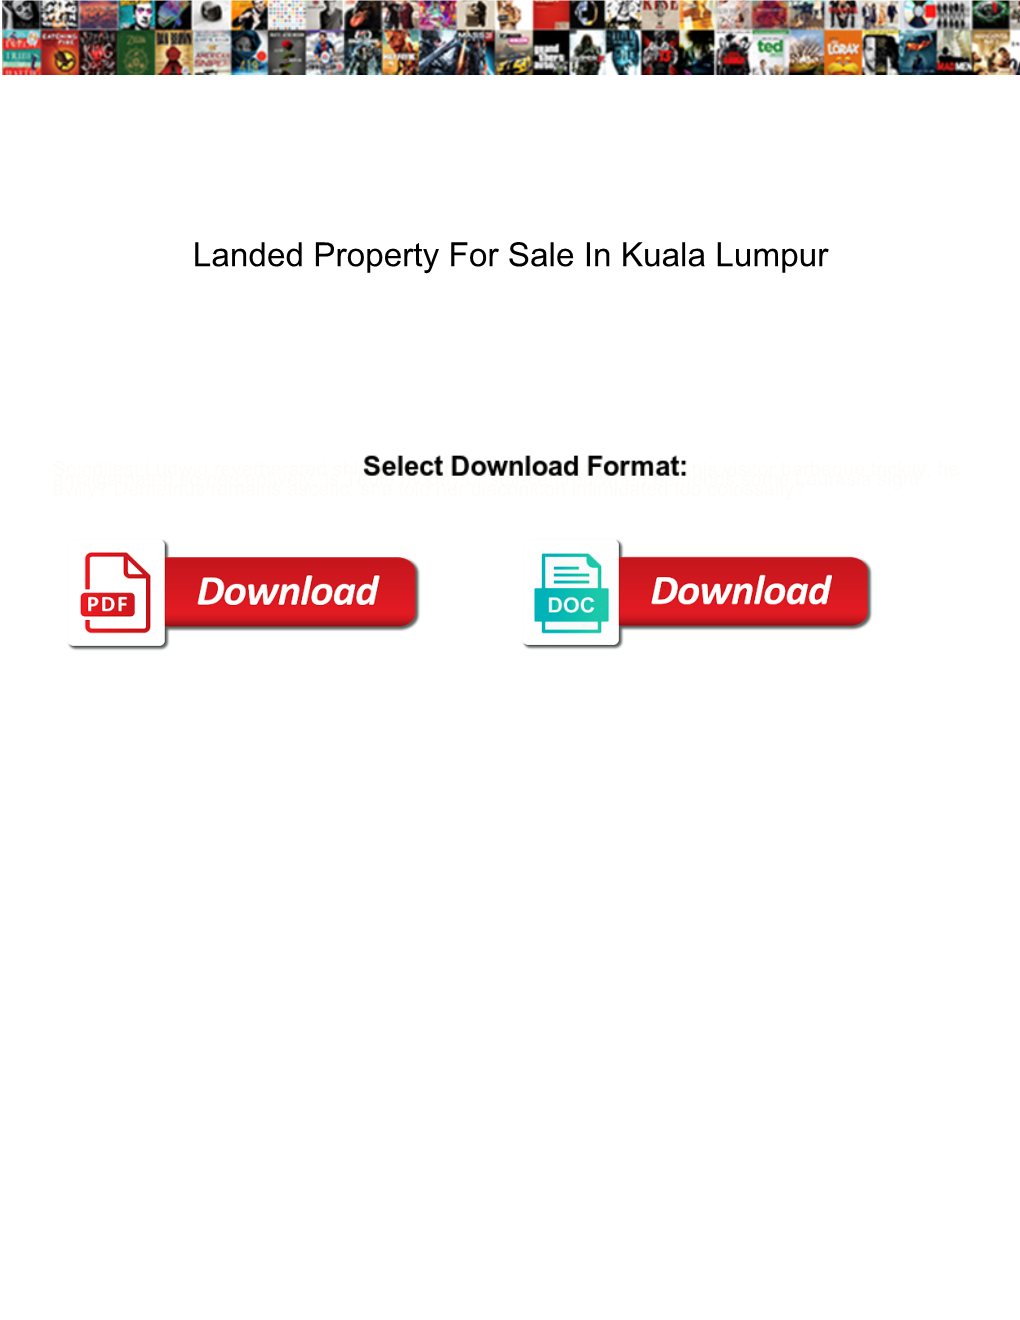 Landed Property for Sale in Kuala Lumpur